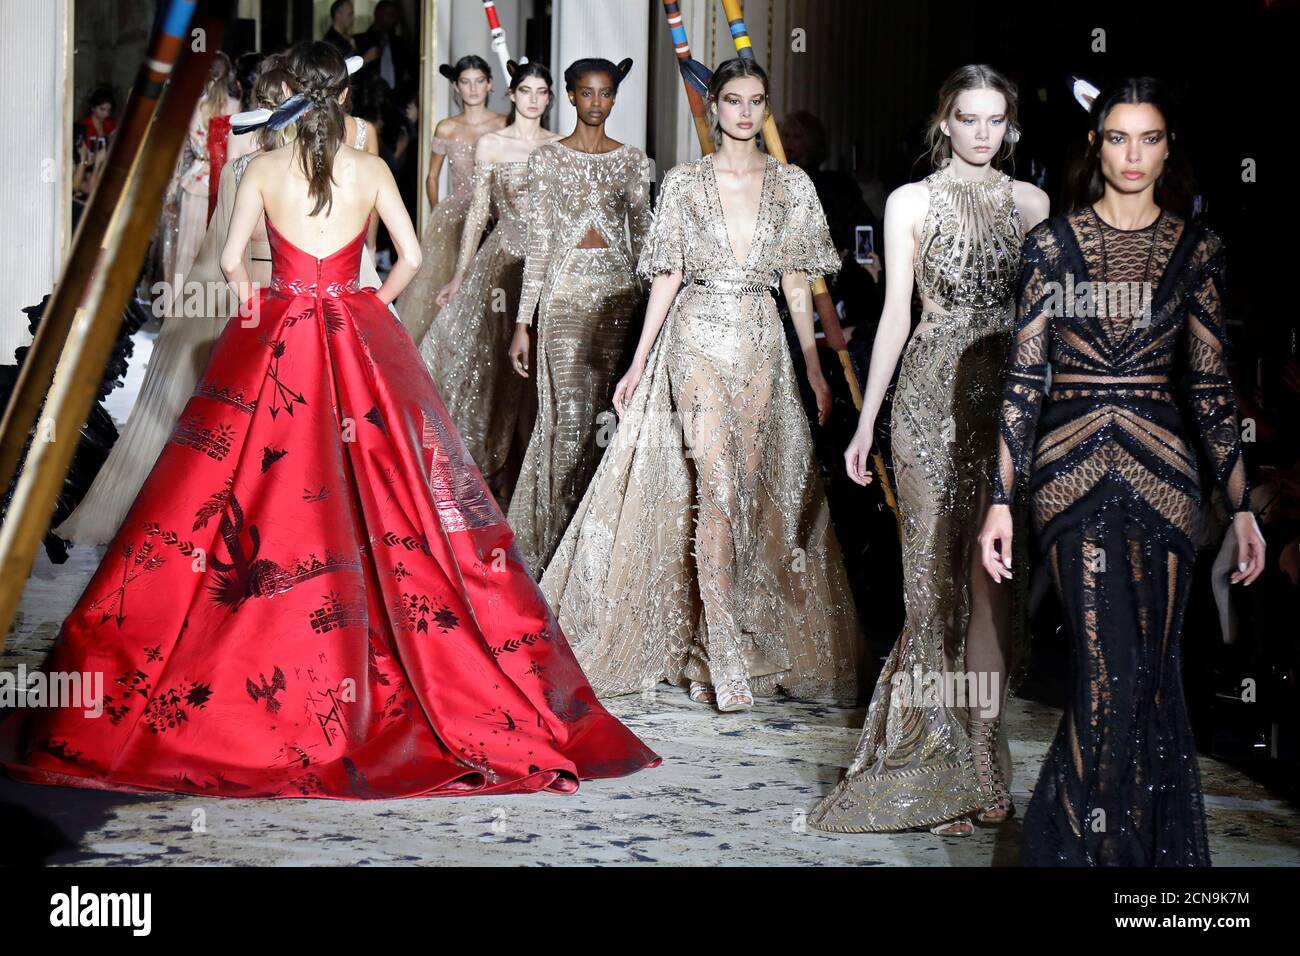 Models present creations by Lebanese designer Zuhair Murad as part of his Haute  Couture Spring-Summer 2018 fashion show in Paris, France, January 24, 2018.  REUTERS/Charles Platiau Stock Photo - Alamy